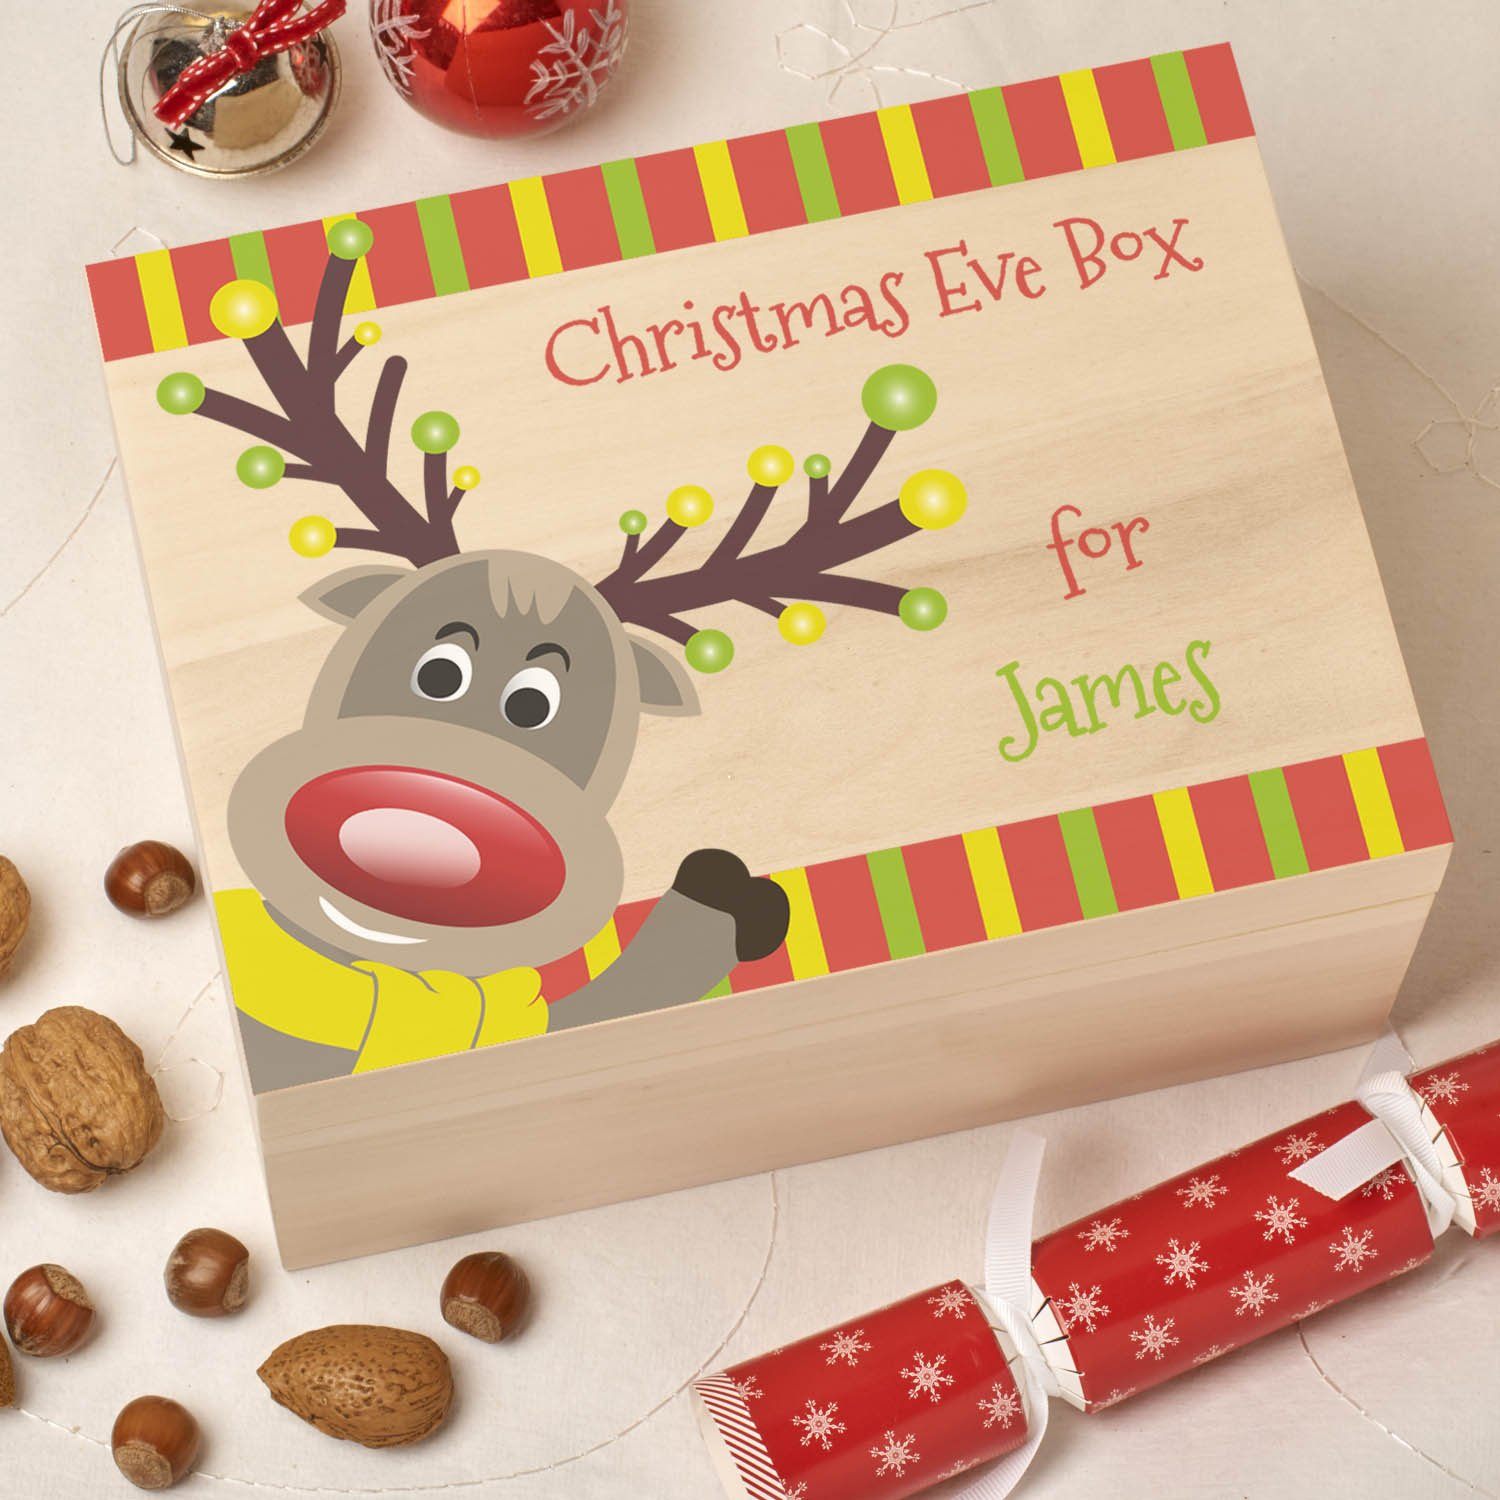 Christmas Box - Colour - Personalised Wooden Colour Christmas Eve Box - Reindeer